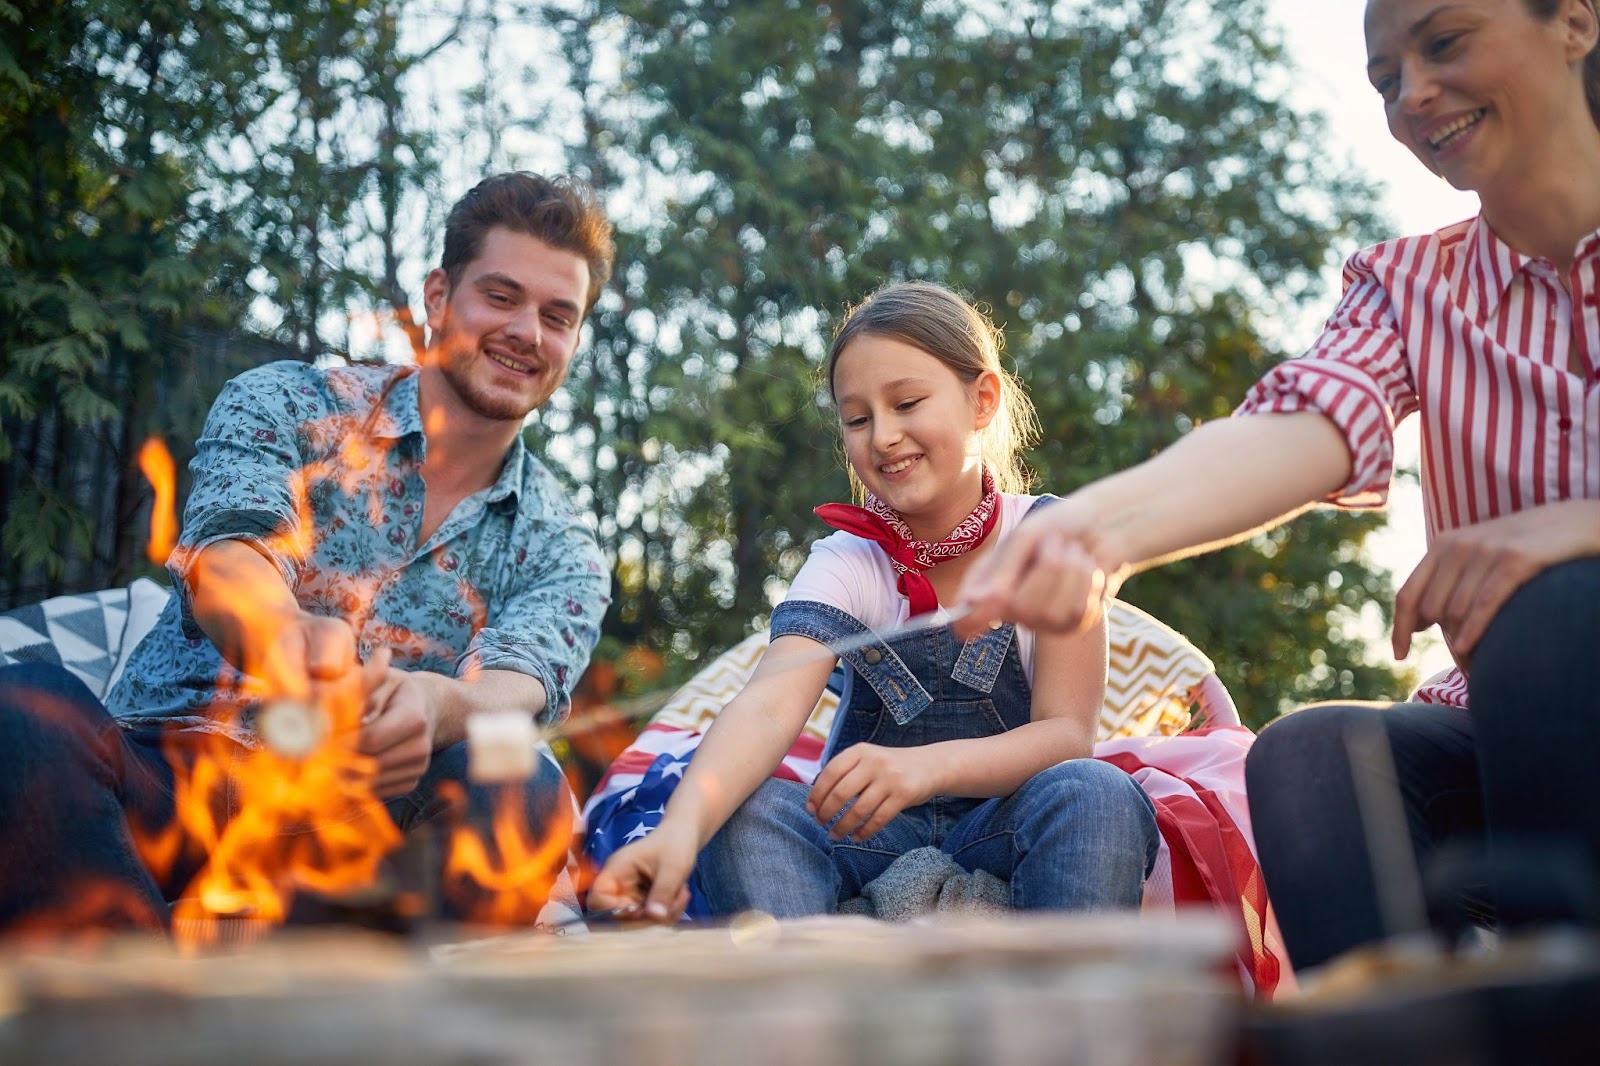 Celebrate July 4th with these ideas for the whole family